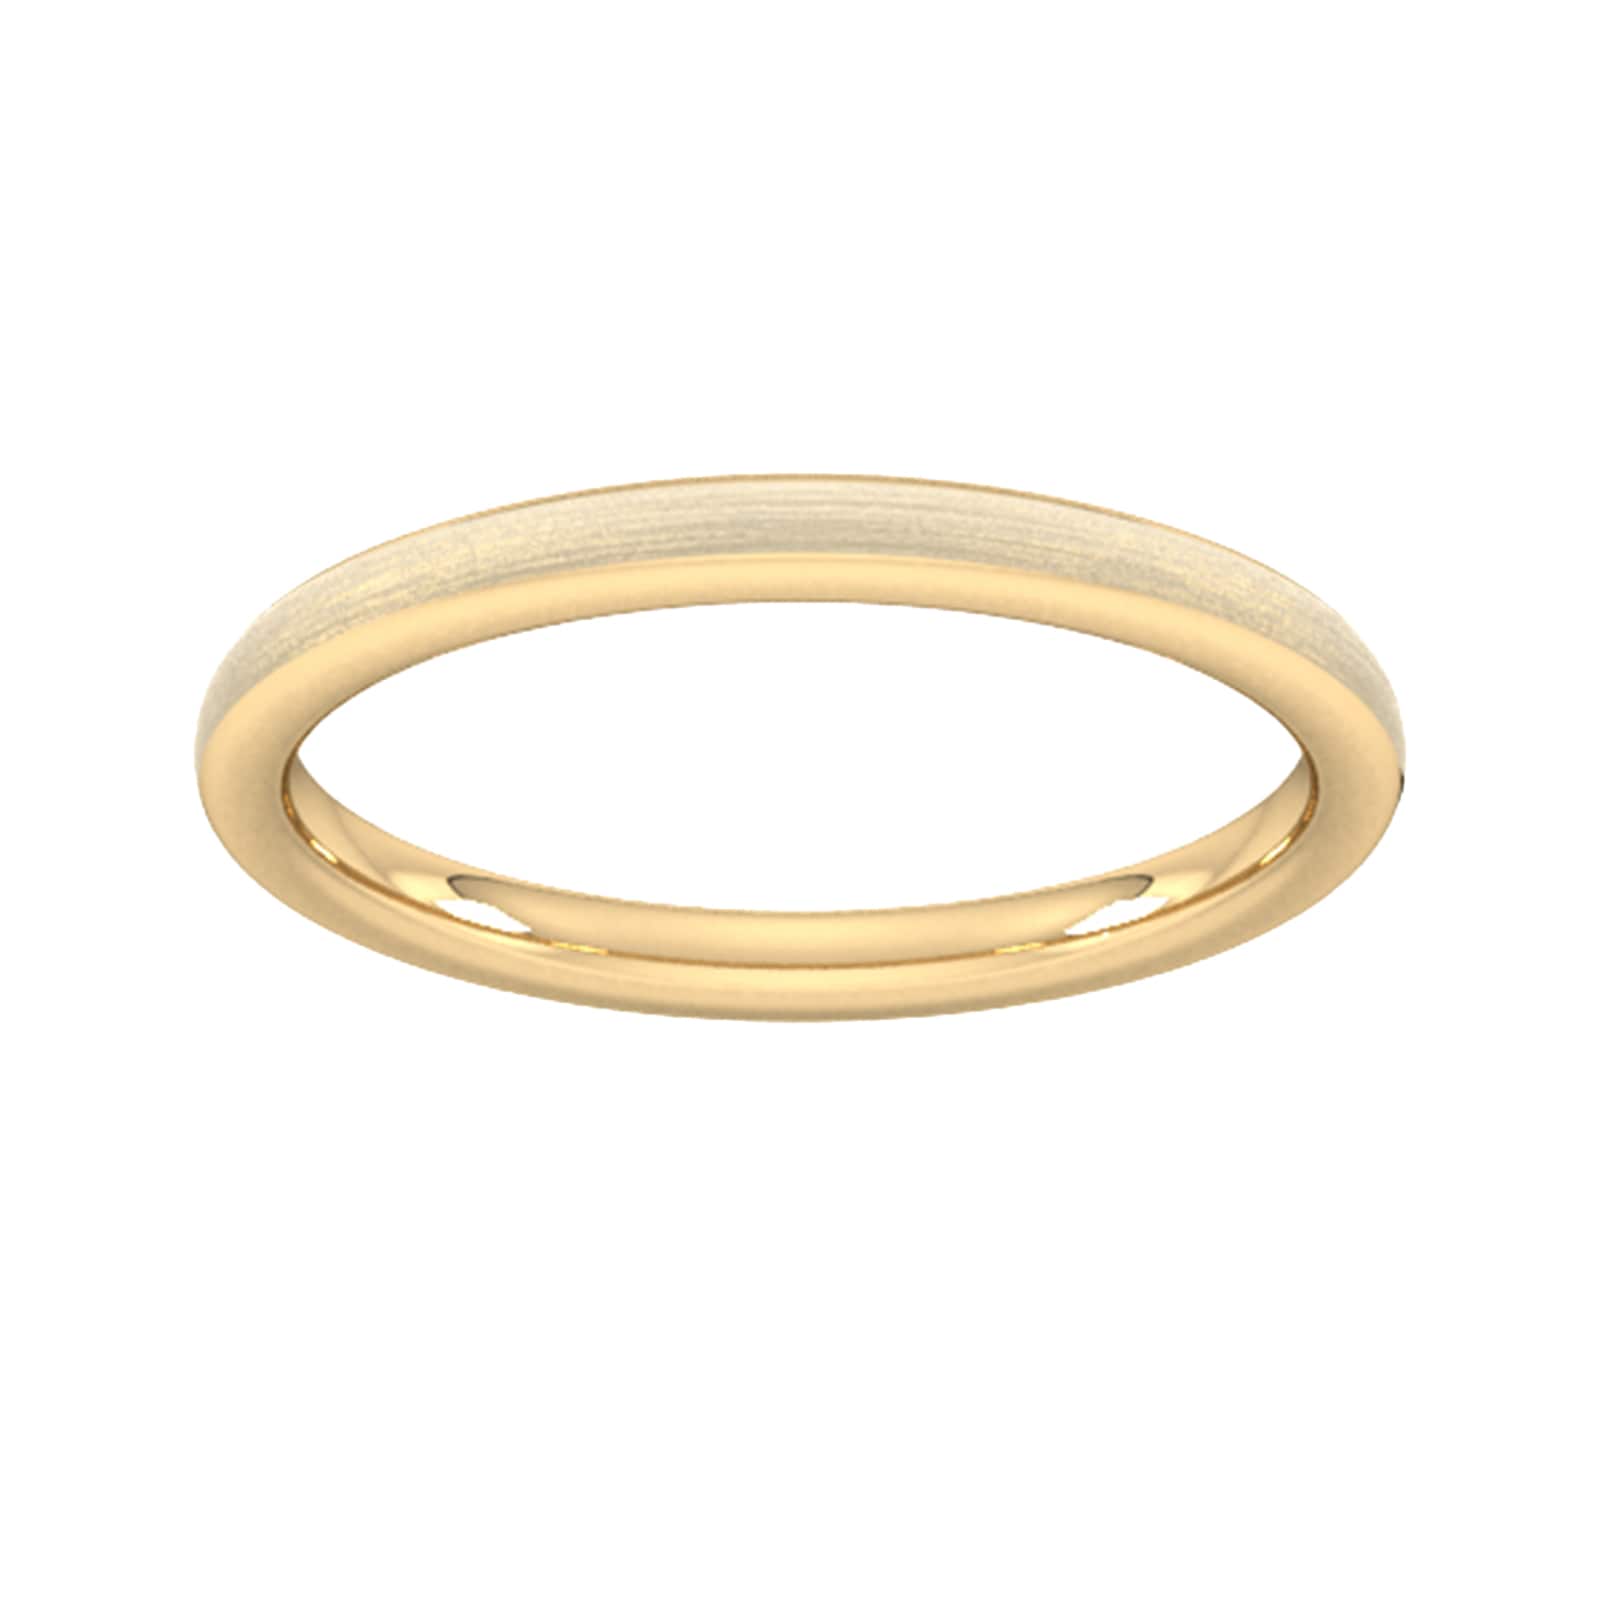 2mm Flat Court Heavy Matt Finished Wedding Ring In 9 Carat Yellow Gold - Ring Size G